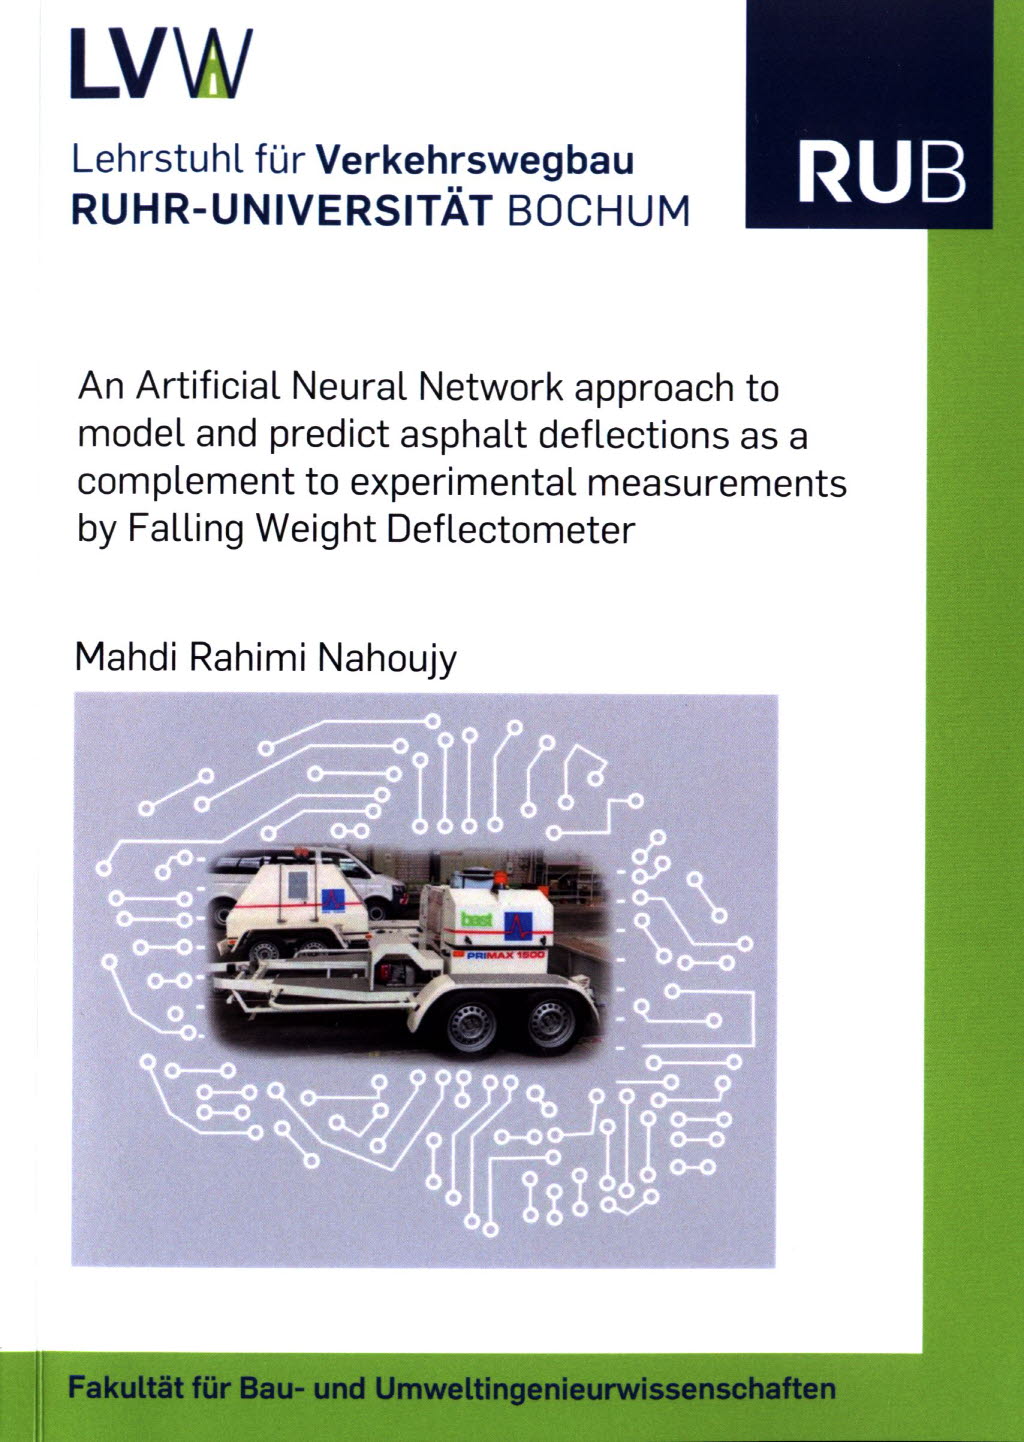 An Artificial Neural Network approach to model and predict asphalt deflections as a complement to experimental measurements by Falling Weight Deflectometer